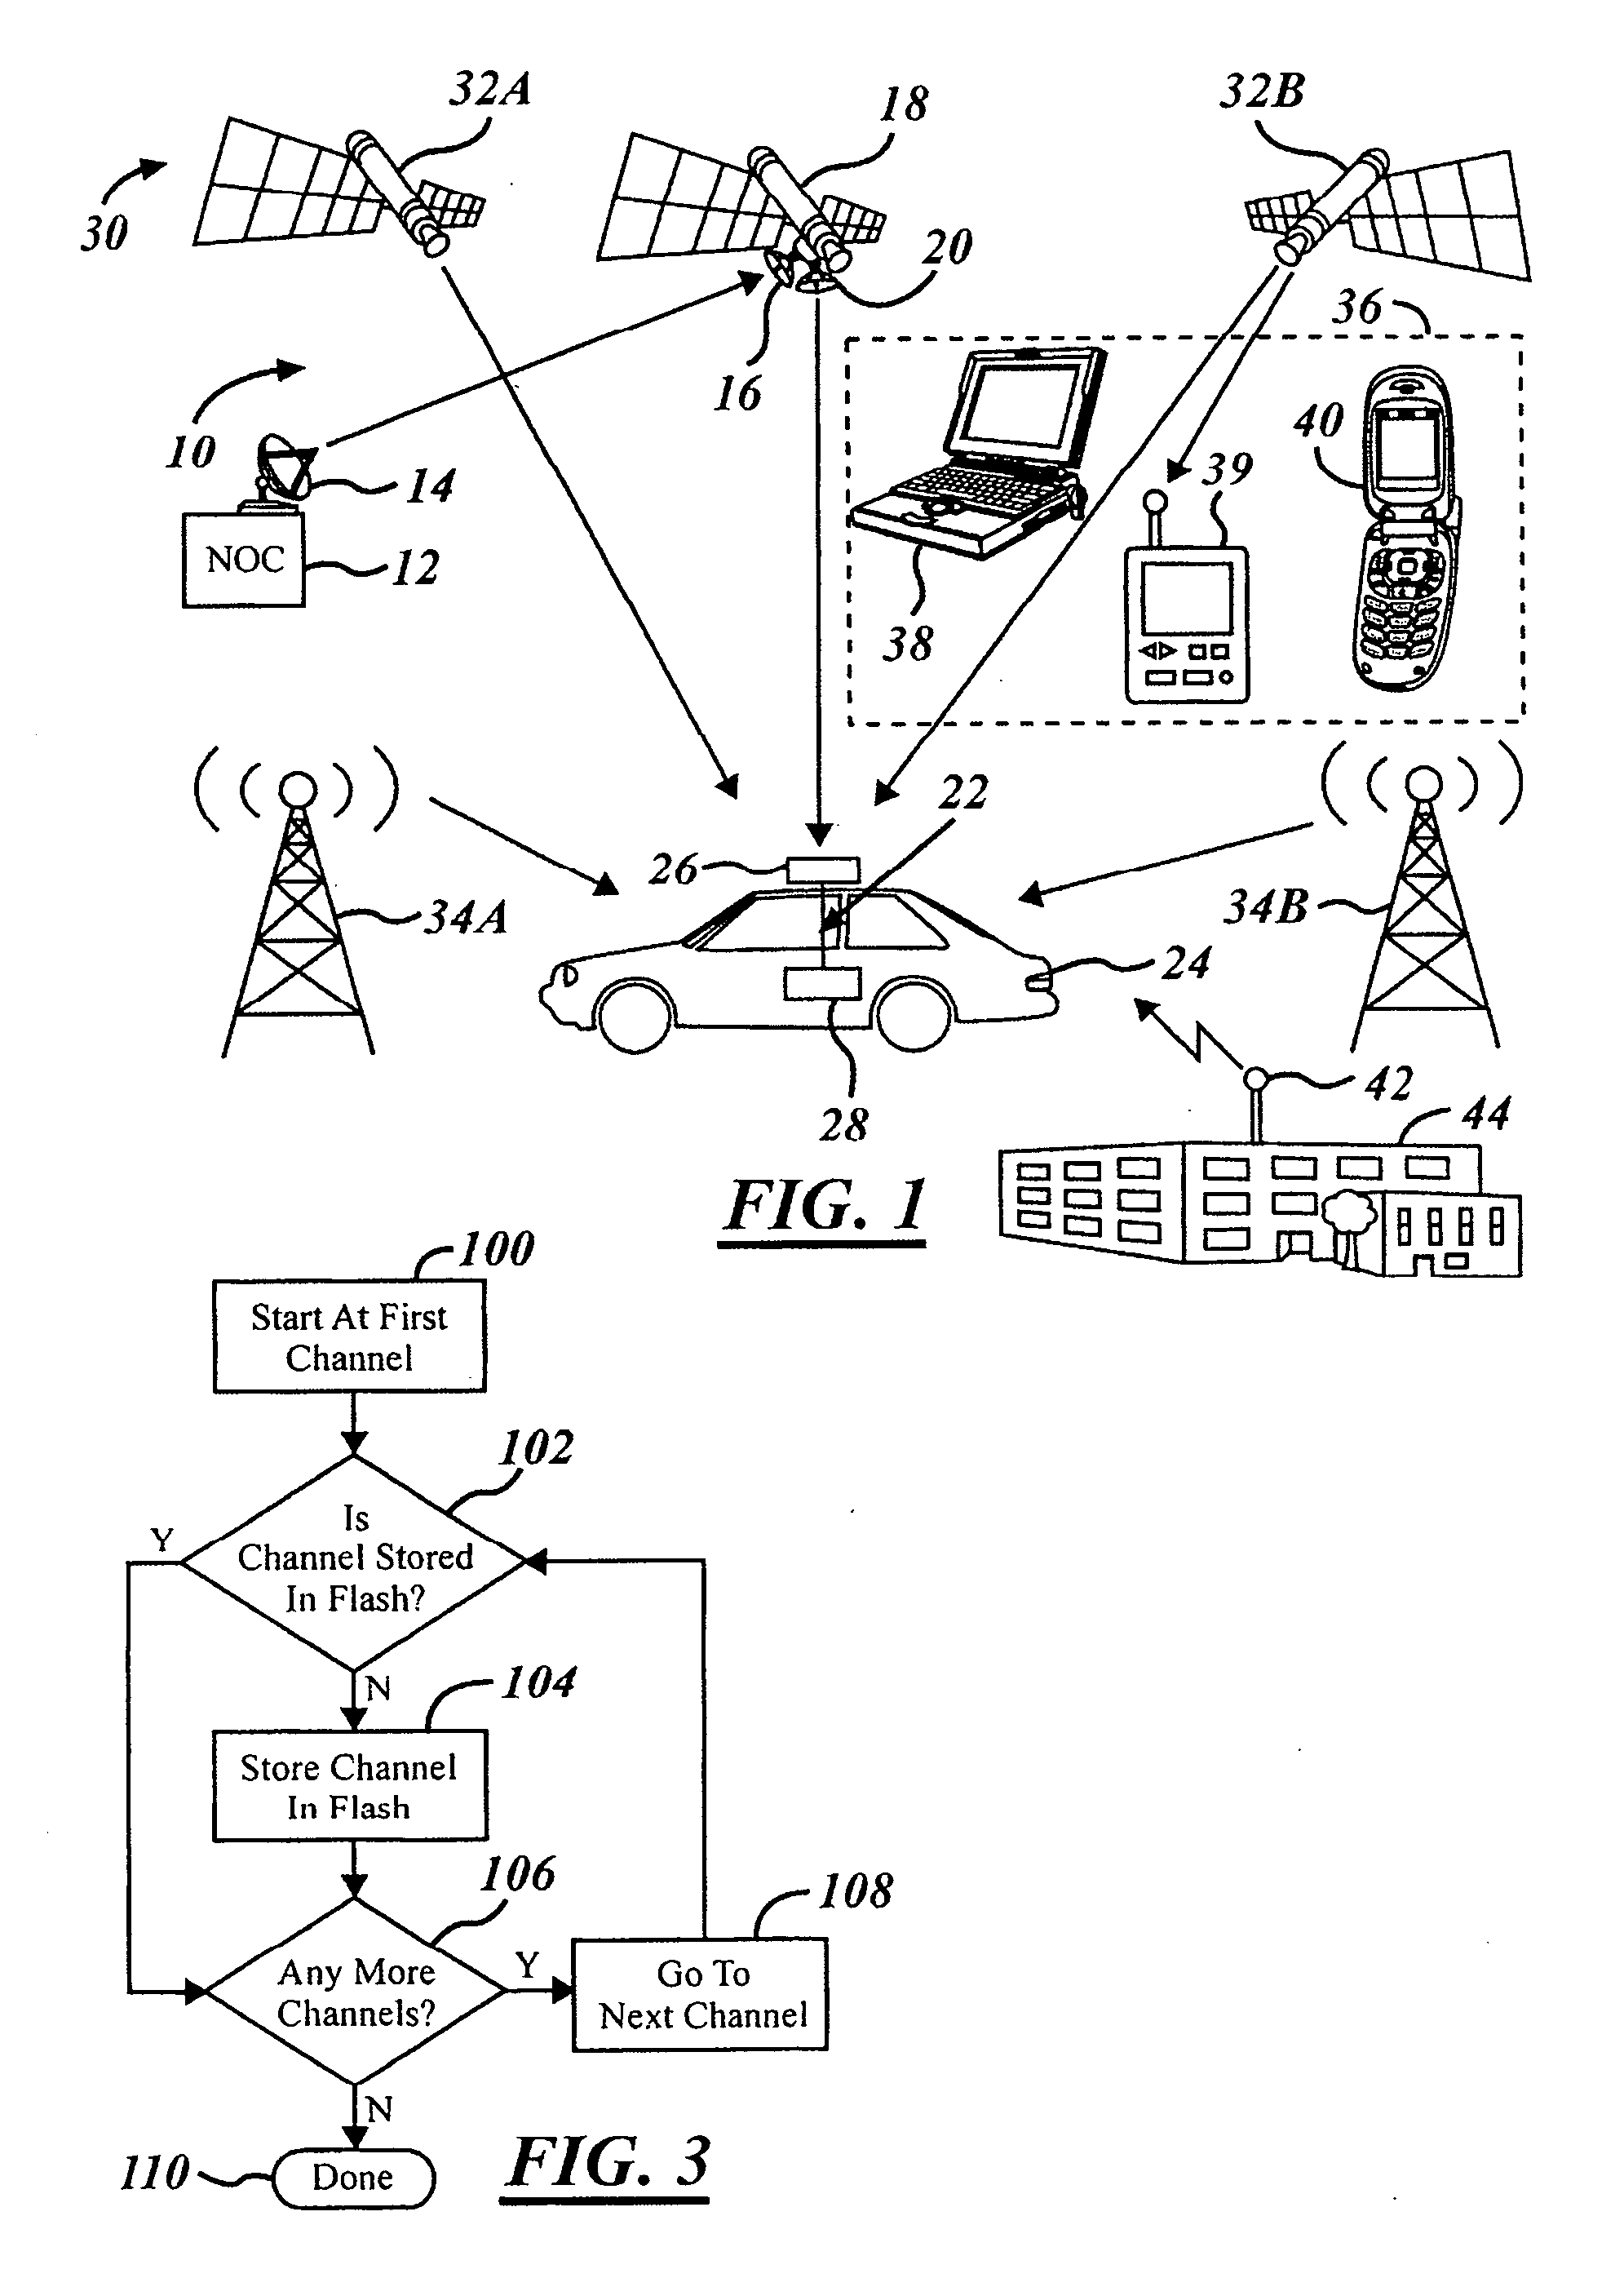 Receiving apparatus using non-volatile memory and method of operating the same